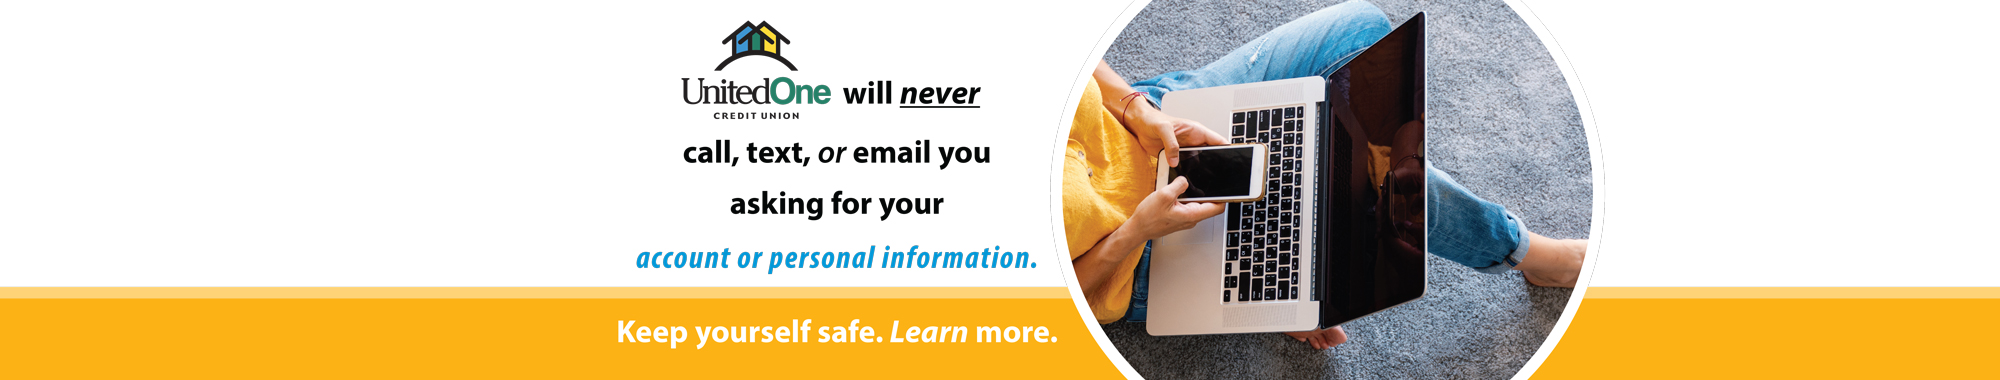 UnitedOne will never call, text or email you asking for your account or personal information. Keep yourself safe. Learn more.